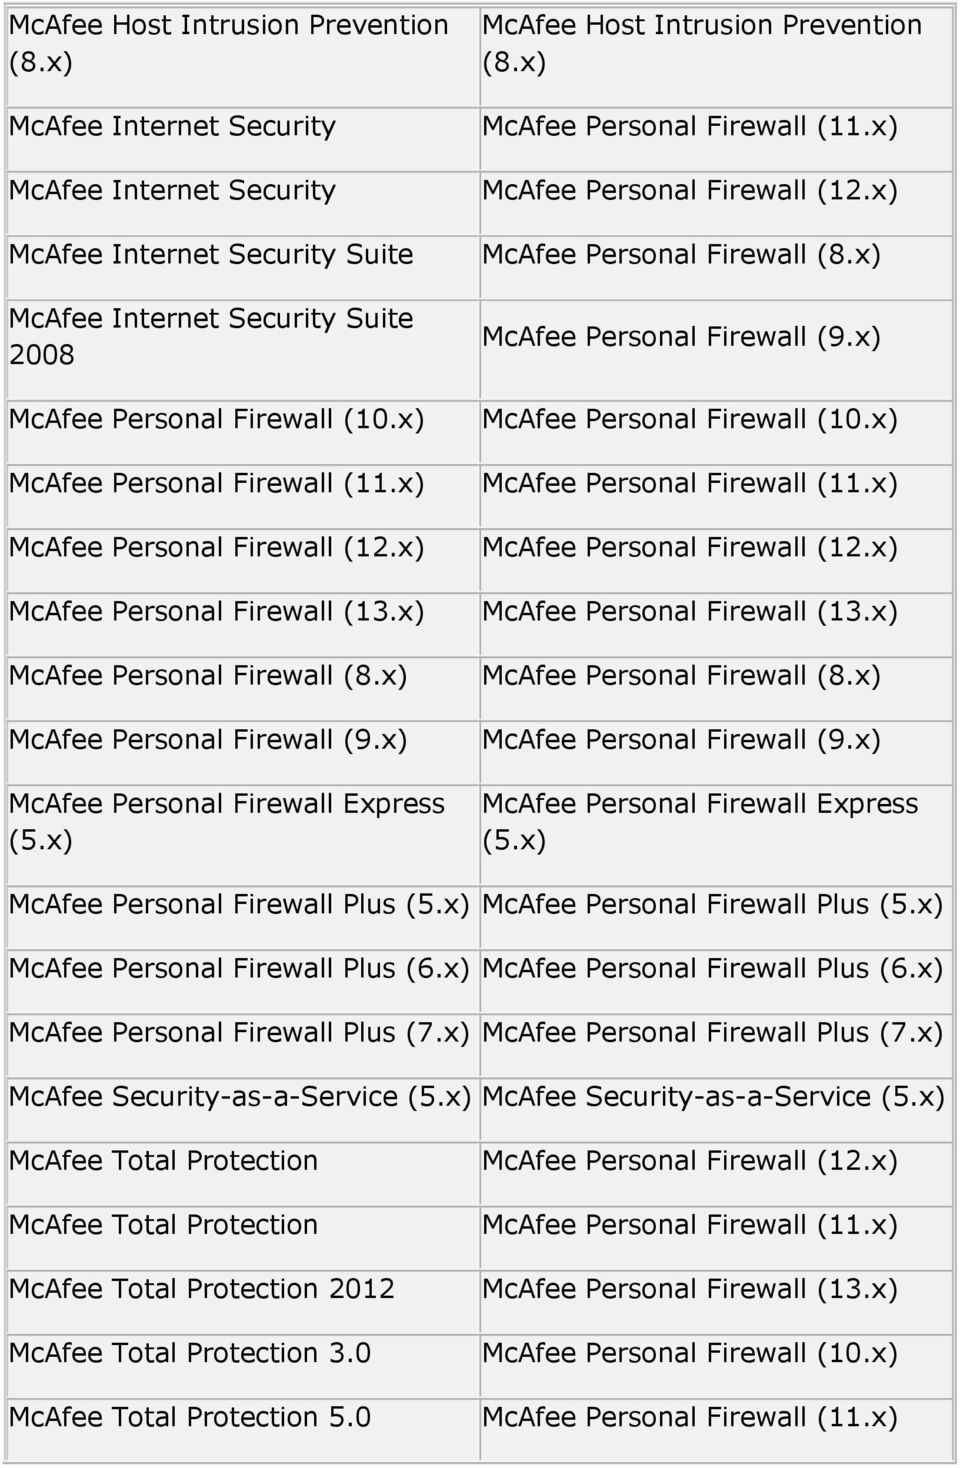 x) McAfee Personal Firewall (11.x) McAfee Personal Firewall (12.x) McAfee Personal Firewall (12.x) McAfee Personal Firewall (13.x) McAfee Personal Firewall (13.x) McAfee Personal Firewall McAfee Personal Firewall (9.